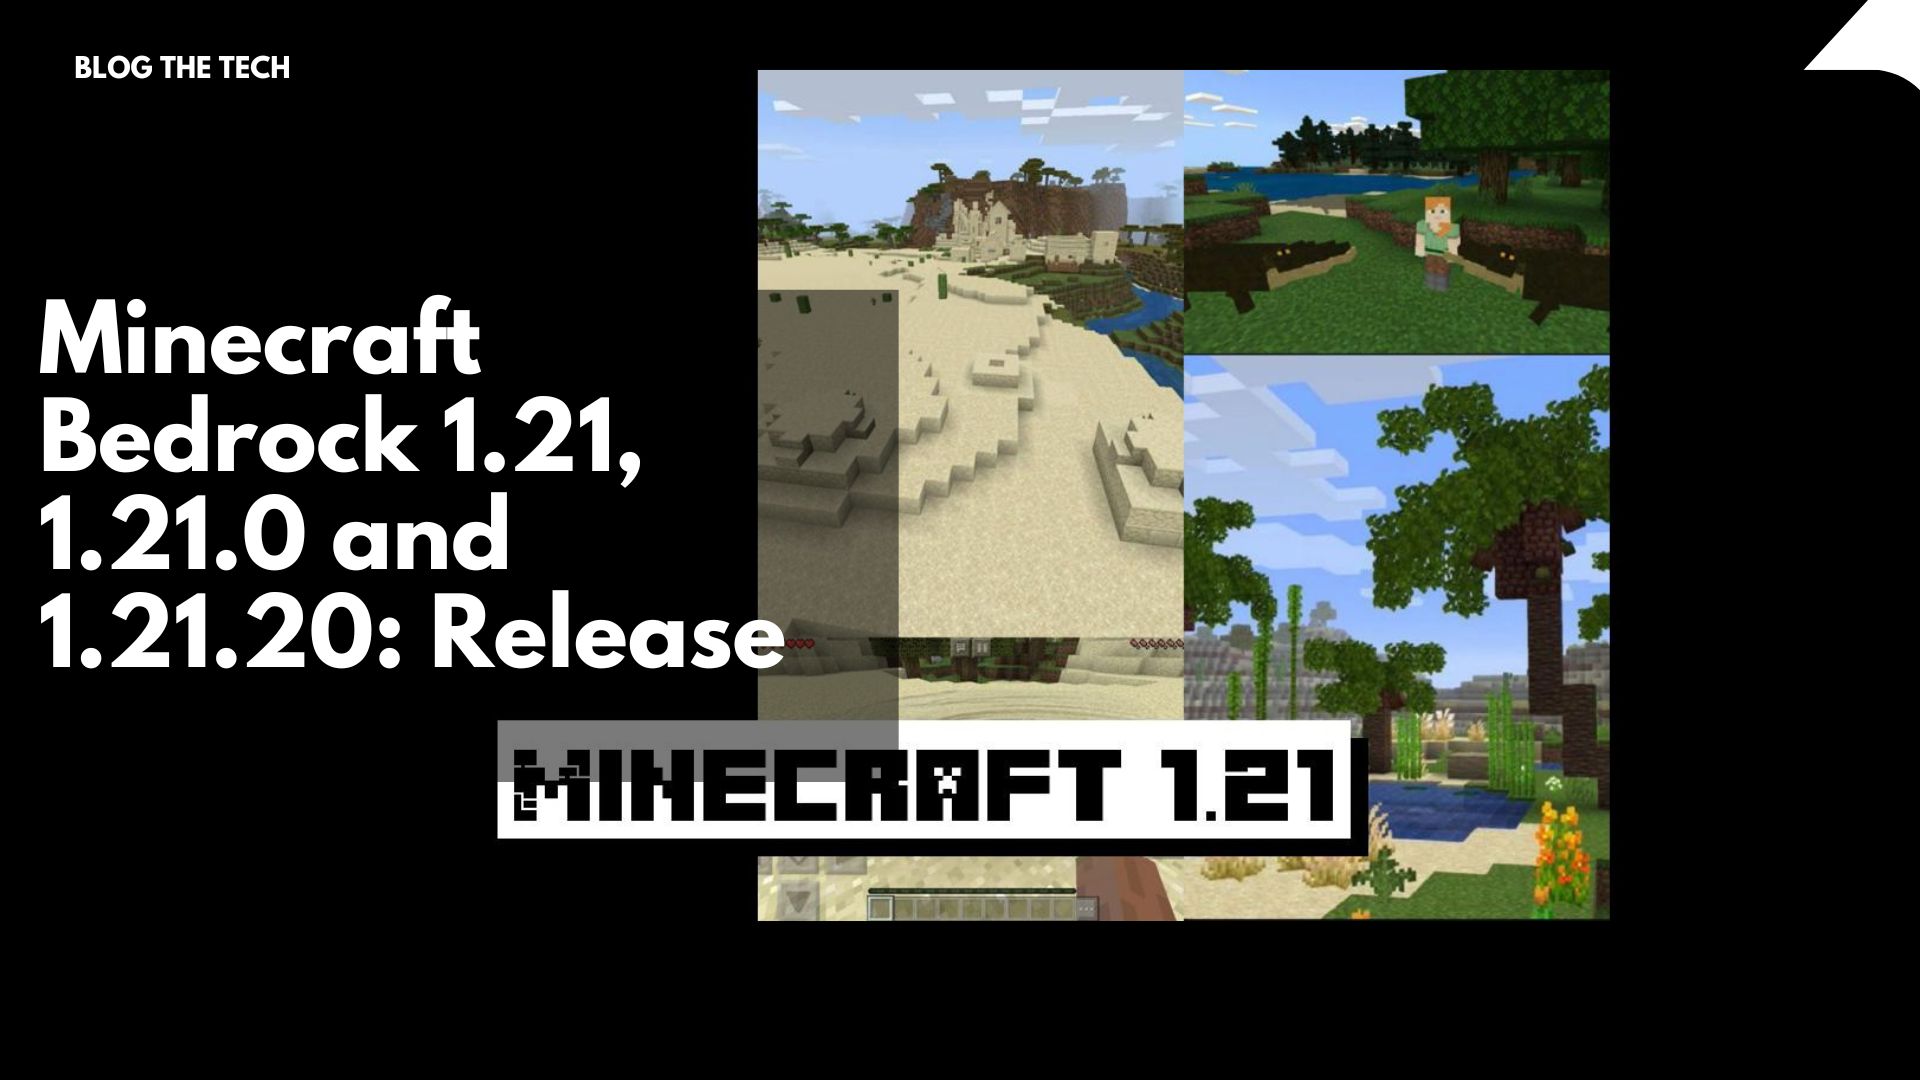 Download Minecraft 1.21, 1.21.0 and 1.21.20 apk free